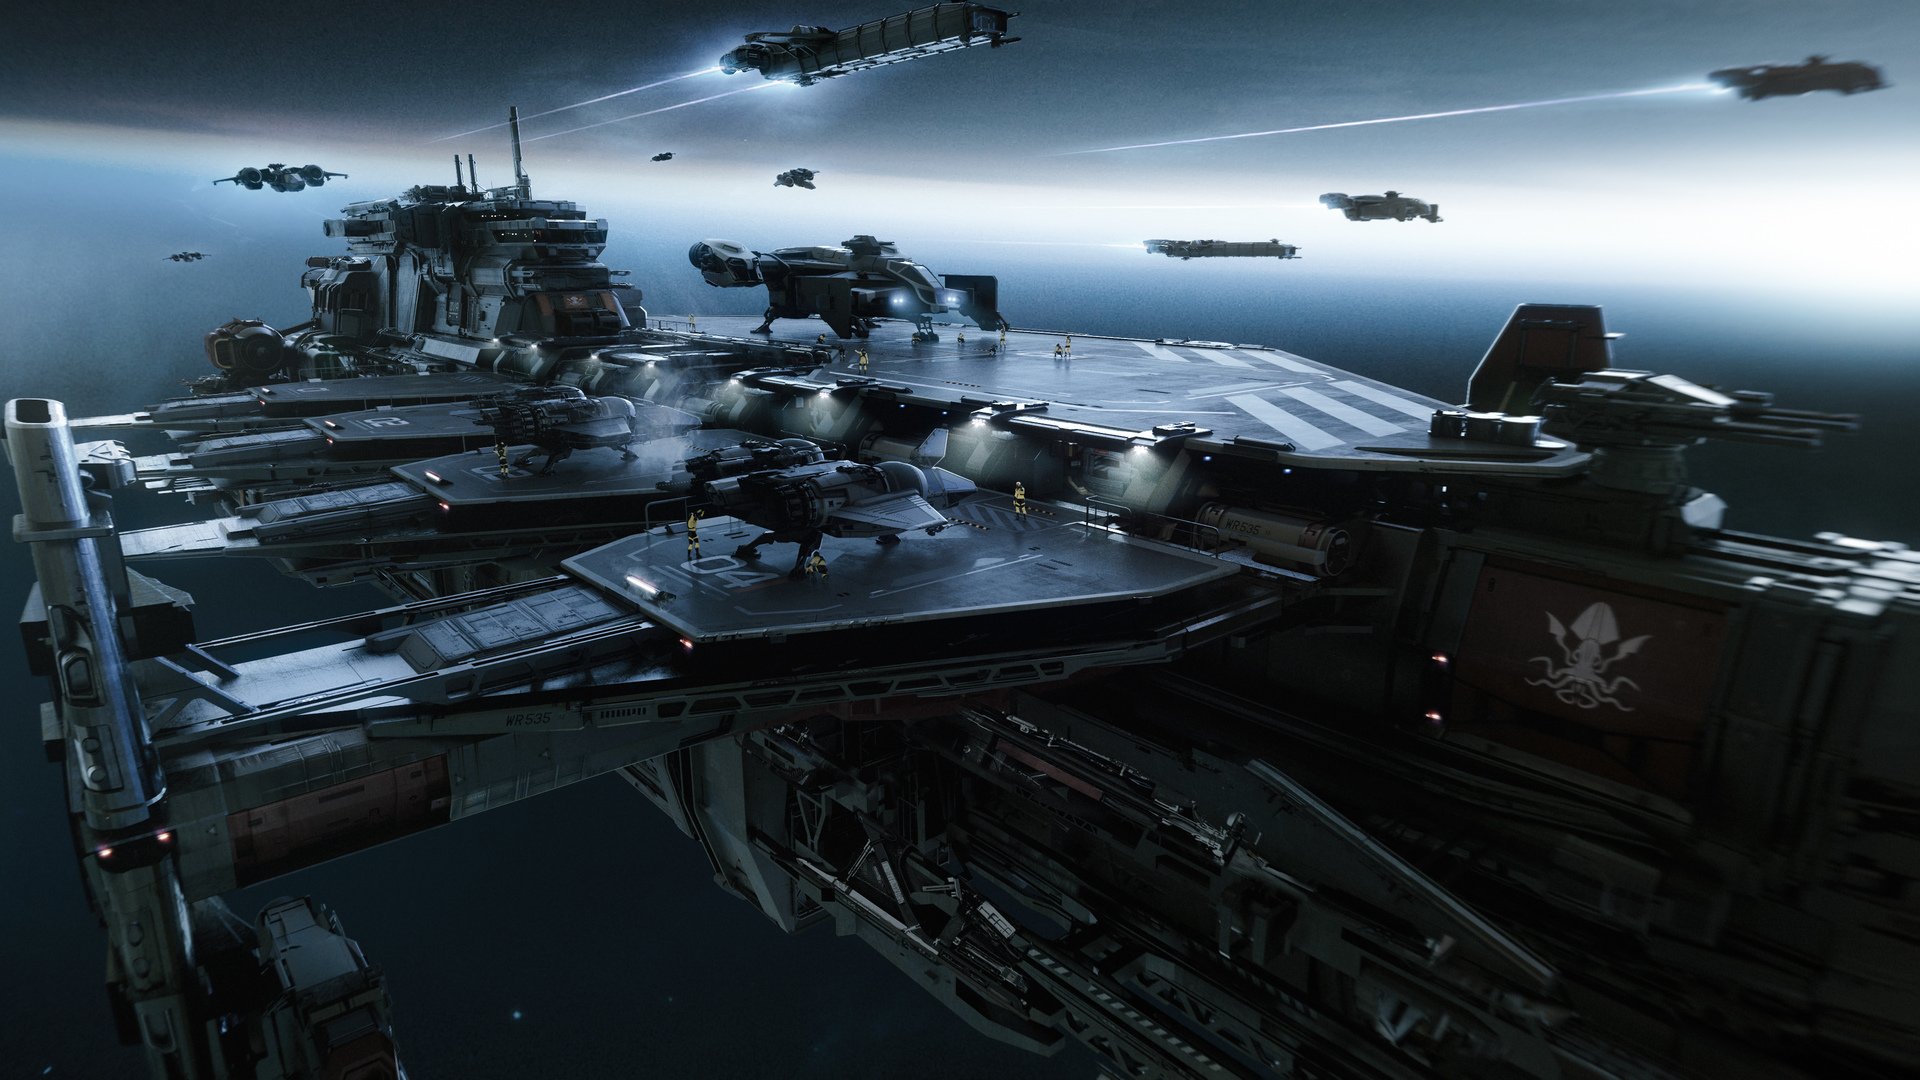 Star Citizen patch 3.18, the space game's biggest update yet, out now